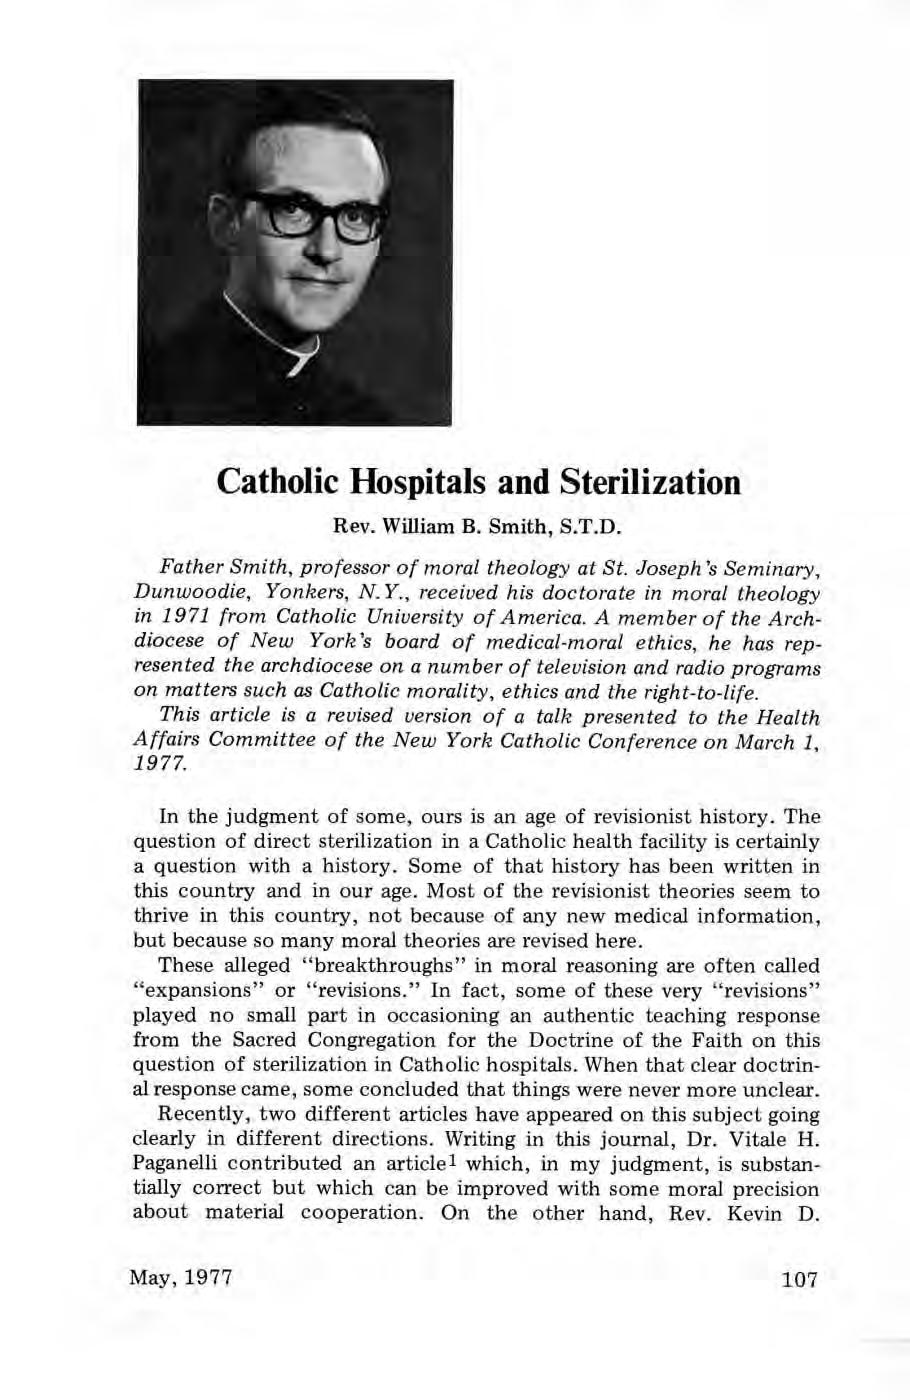 Catholic Hospitals and Sterilization Rev. William B. Smith, S.T.D. Father Smith, professor of moral theology at St. Joseph's Seminary, Dunwoodie, Yo